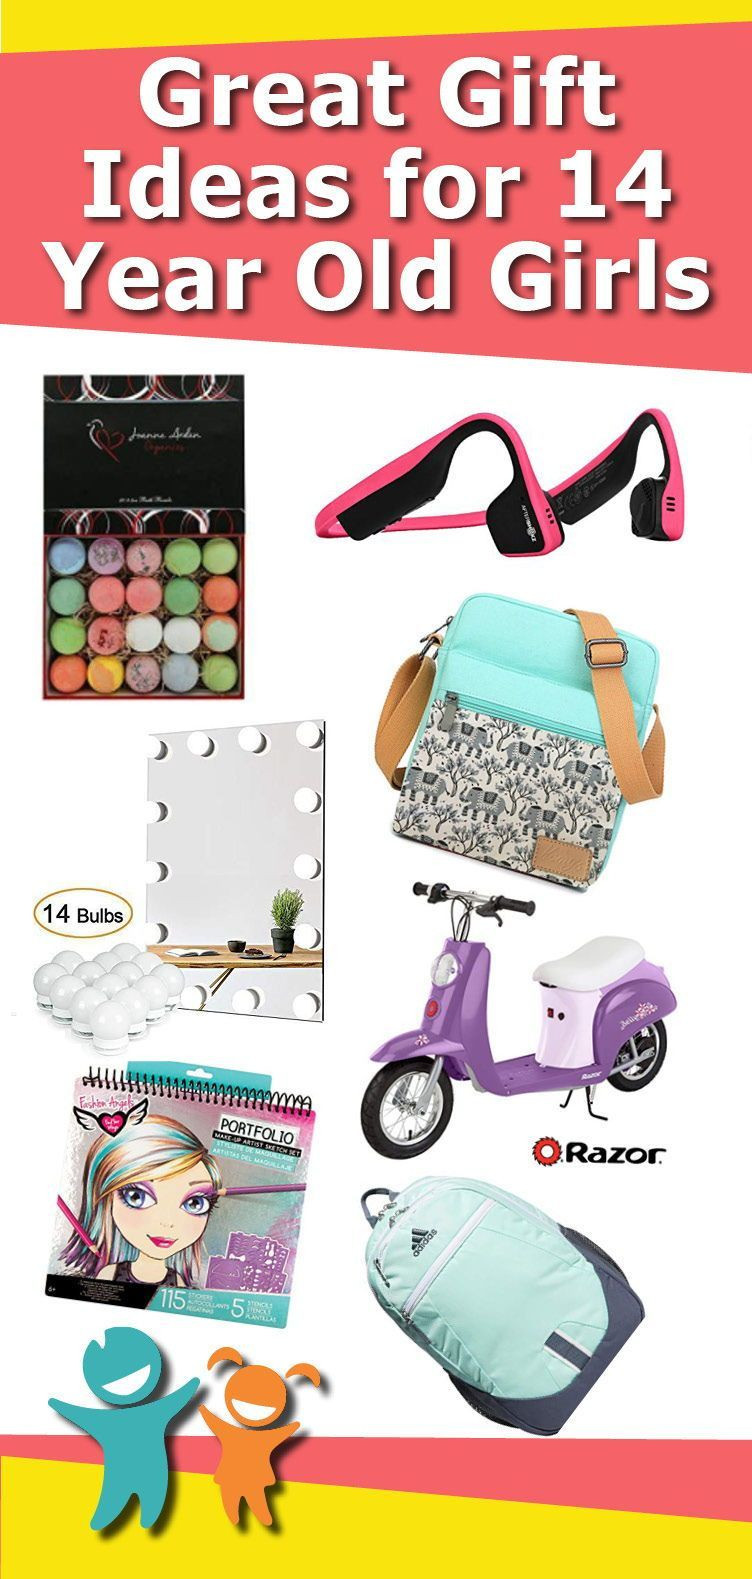 Gift Ideas For 14 Year Old Girls
 30 Great Gift Ideas for 14 Year Old Girls